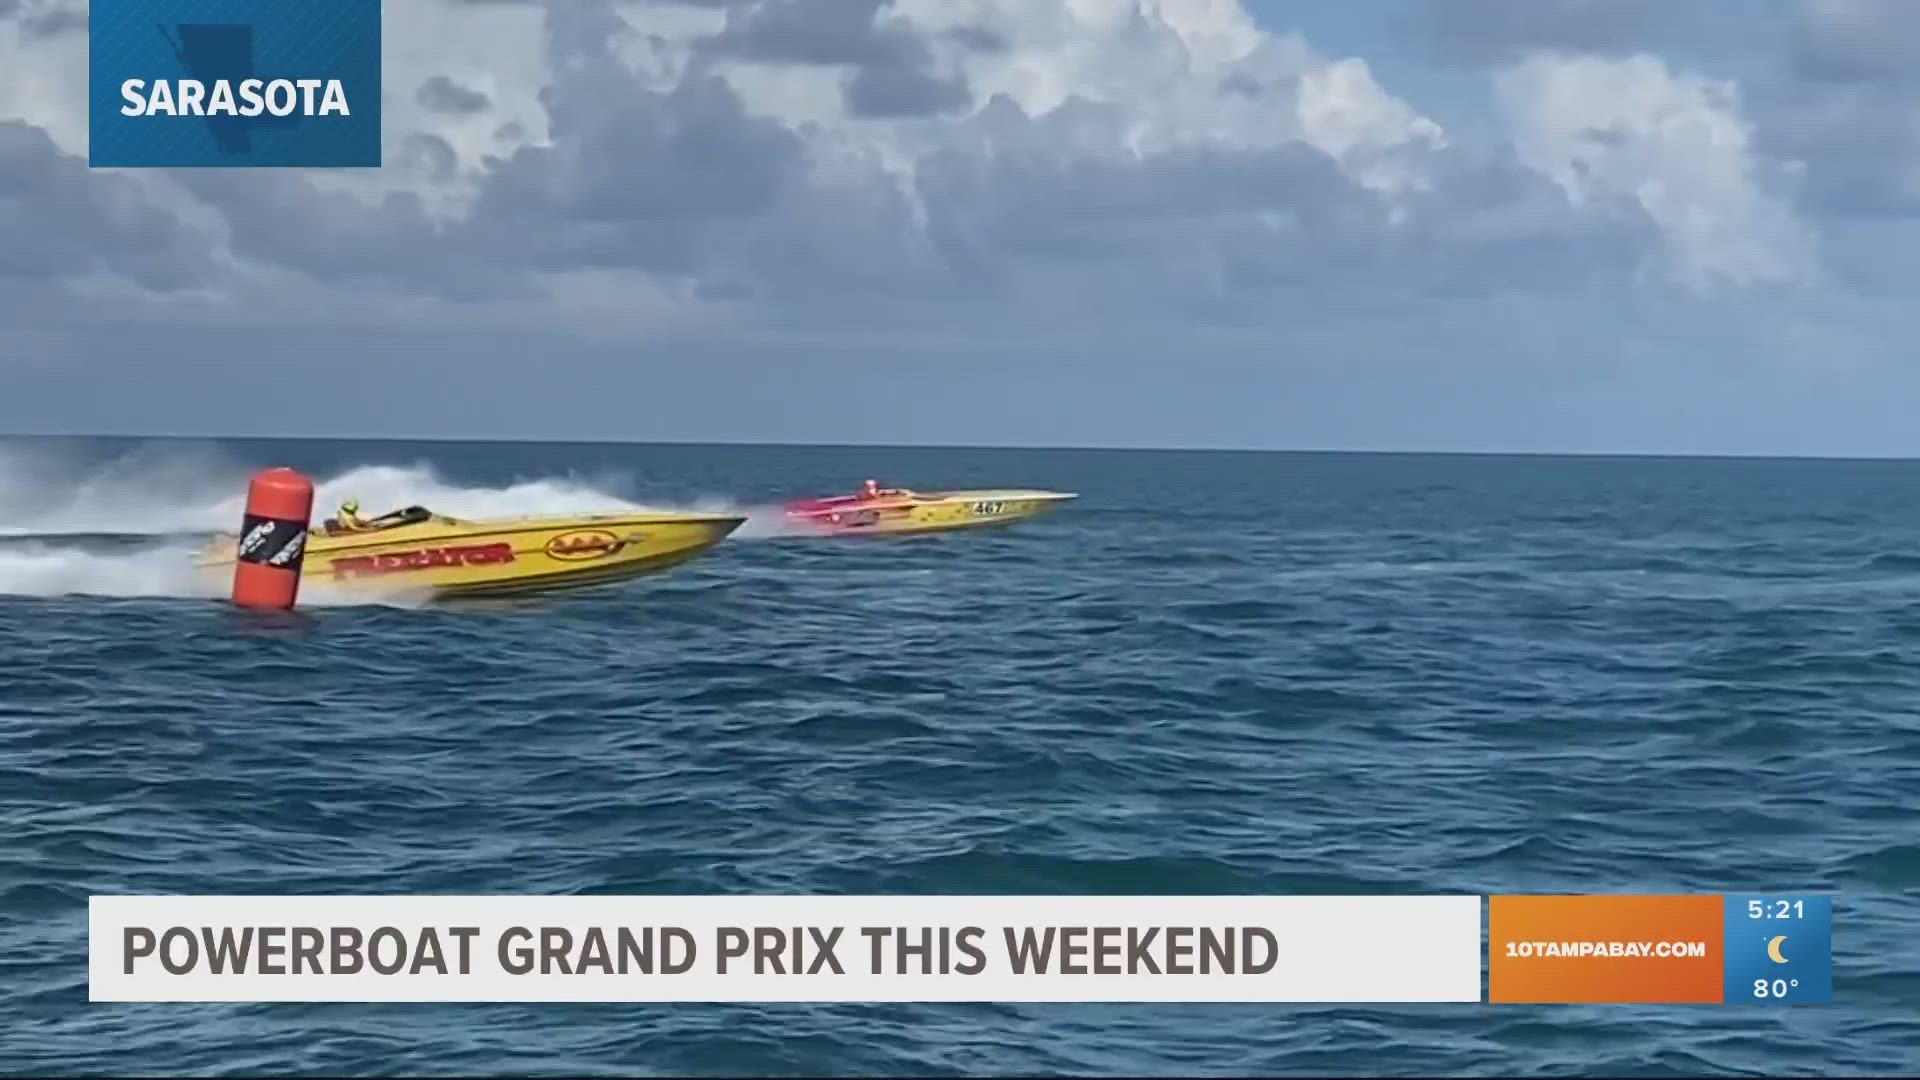 This free event will reportedly attract more than 60 powerboat racing teams from Europe, Australia, Canada and the U.S.